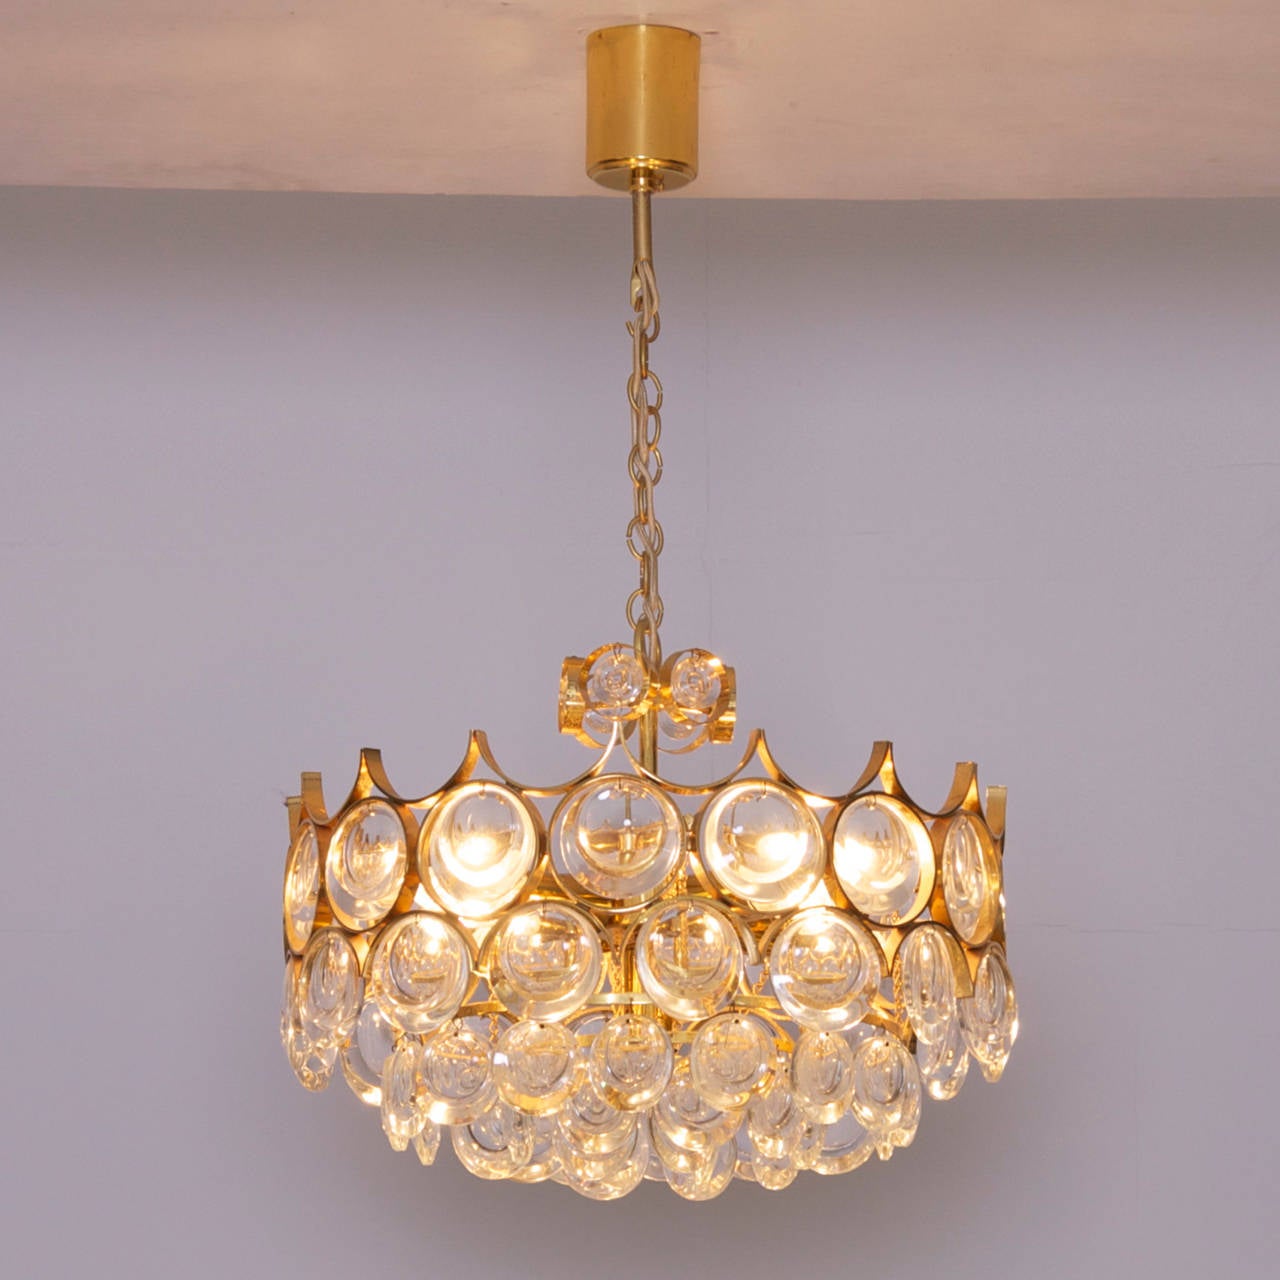 Stunning, high end quality chandelier from Palwa. The chandelier has a 24-carat gilt brass frame with wonderful jewel like glasses, which floats every room in a beautiful warm light. It is fitted with four E14 bulbs.

